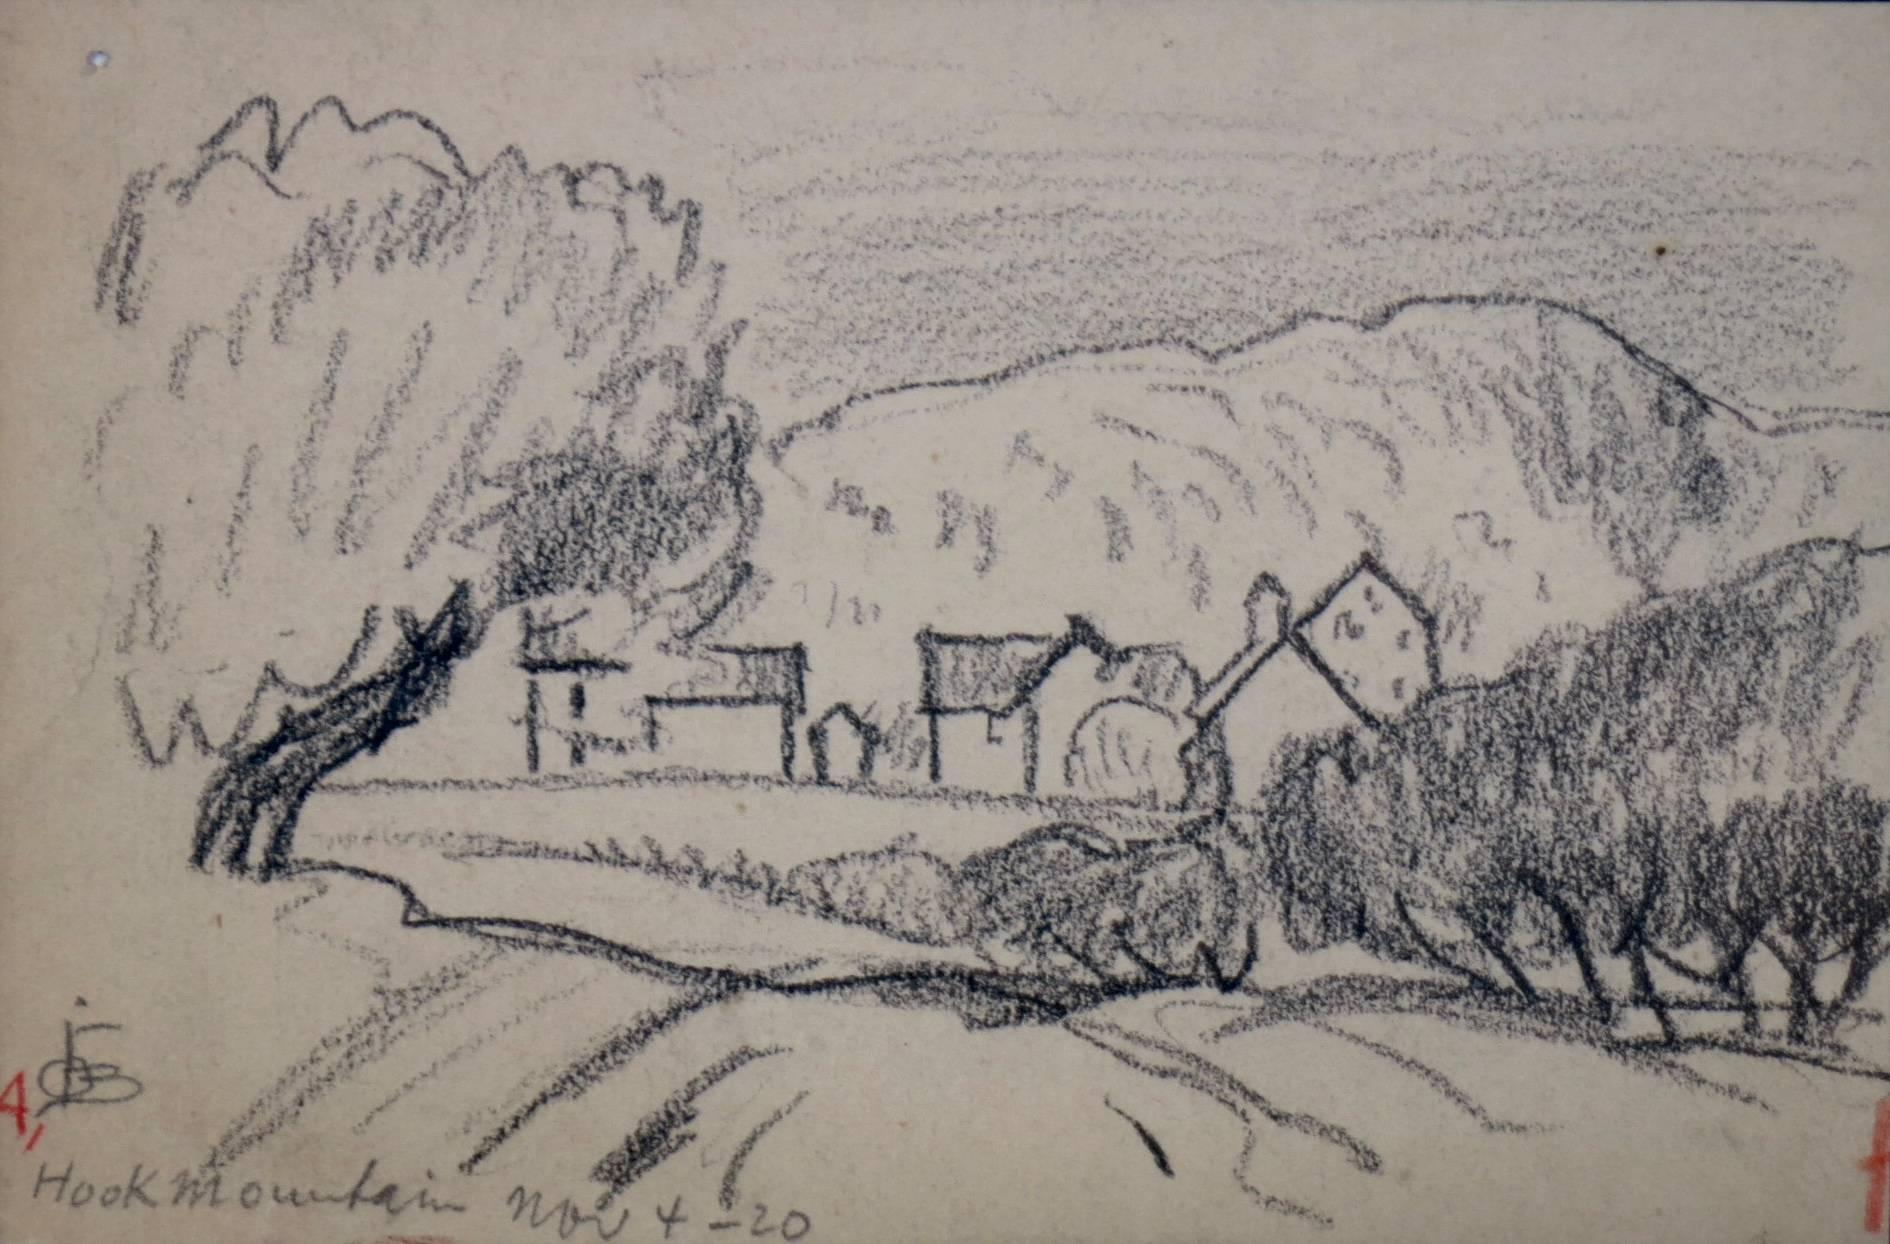 Modernist drawing on paper of houses in a landscape in Hook Mountian, New York by German / American artist Oscar Florianus Bluemner, (1867-1938).
Titled 'Hook Mountain, Nov 4 - 20'.

Oscar Bluemner was an important early American modernist artist